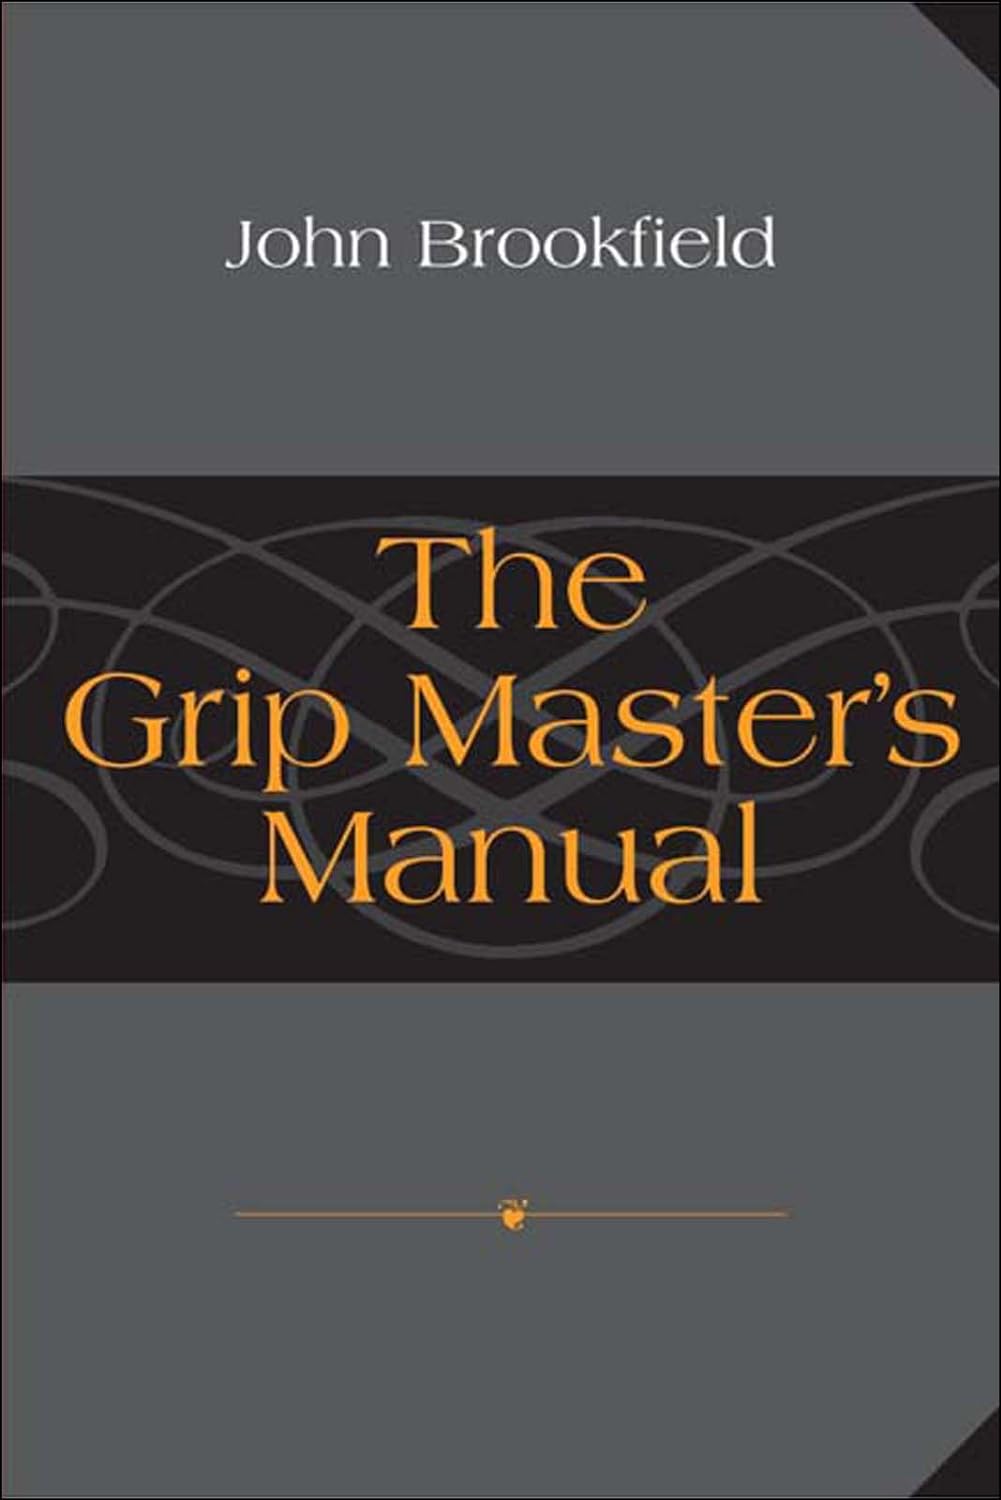 The Grip Master's Manual Book by John Brookfield (Preowned)